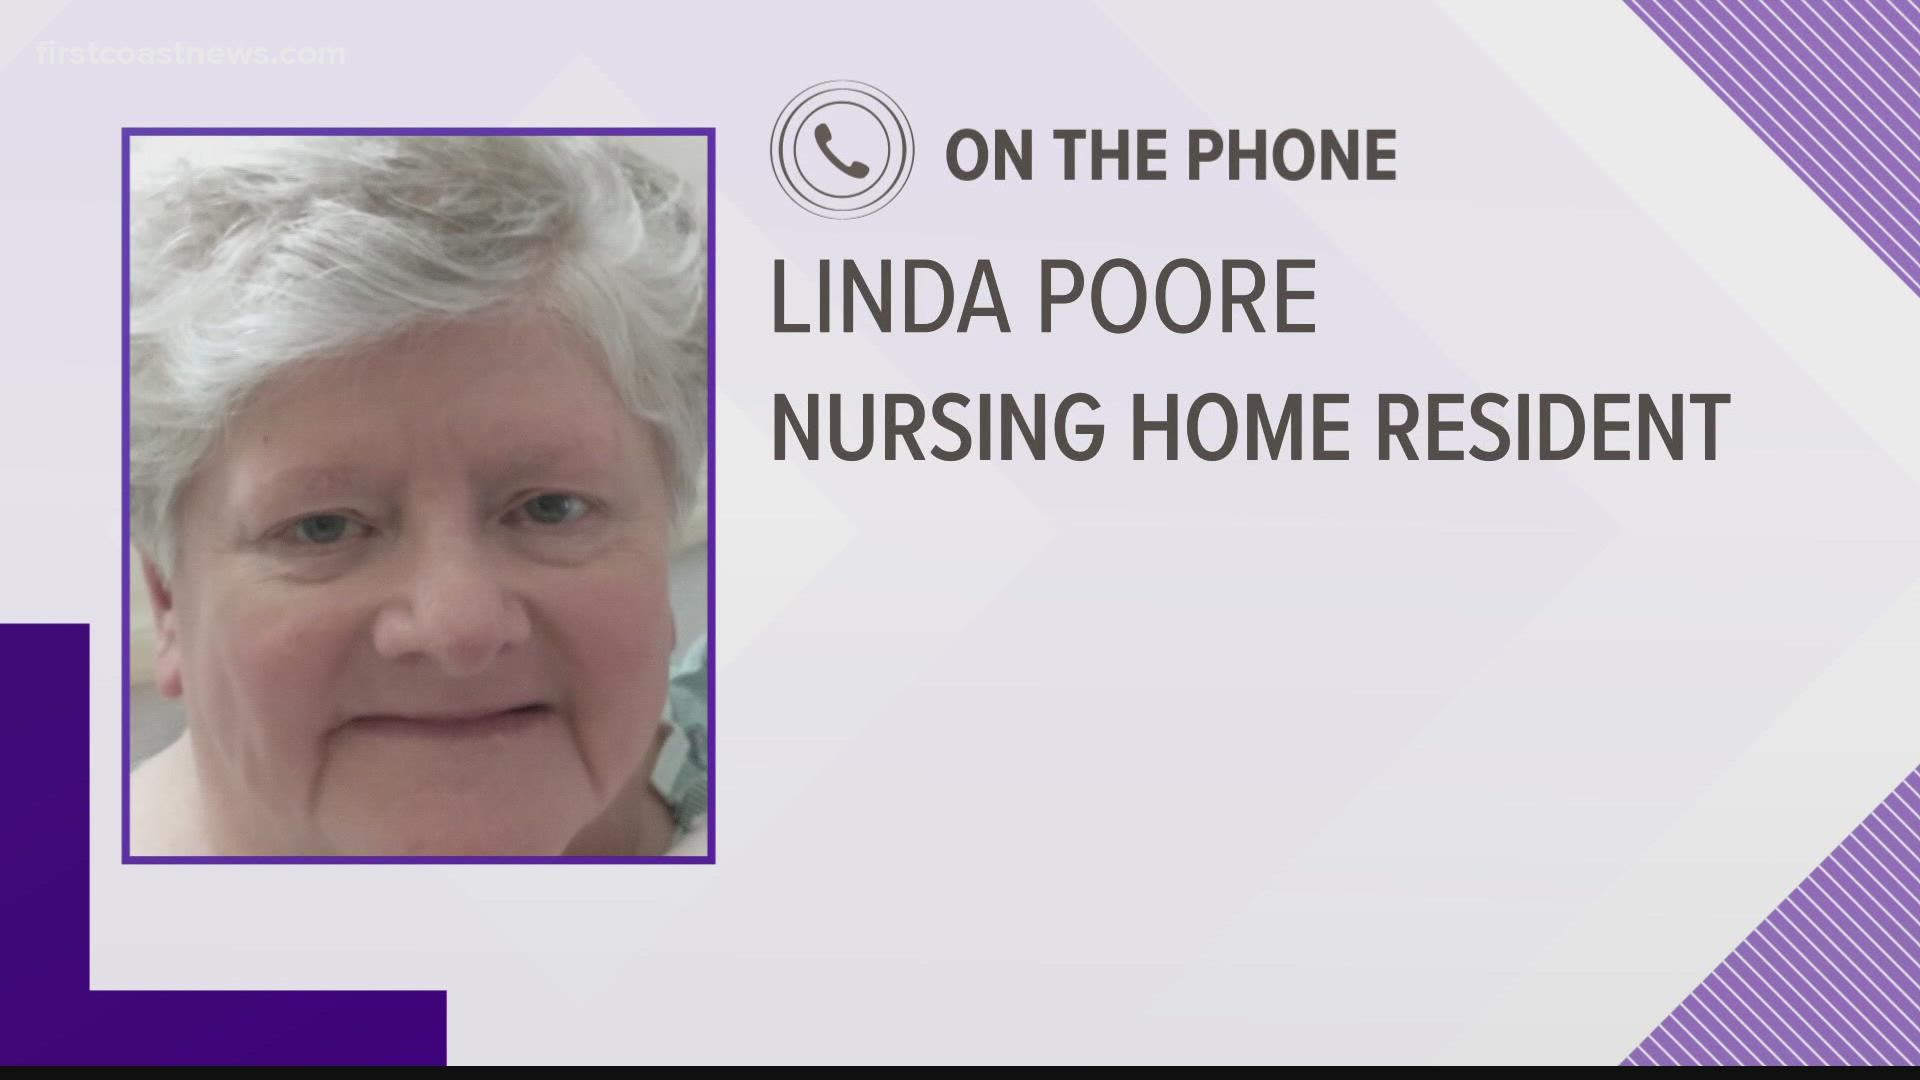 A Jacksonville nursing home resident wants her social security payments to rise to meet the cost of inflation.